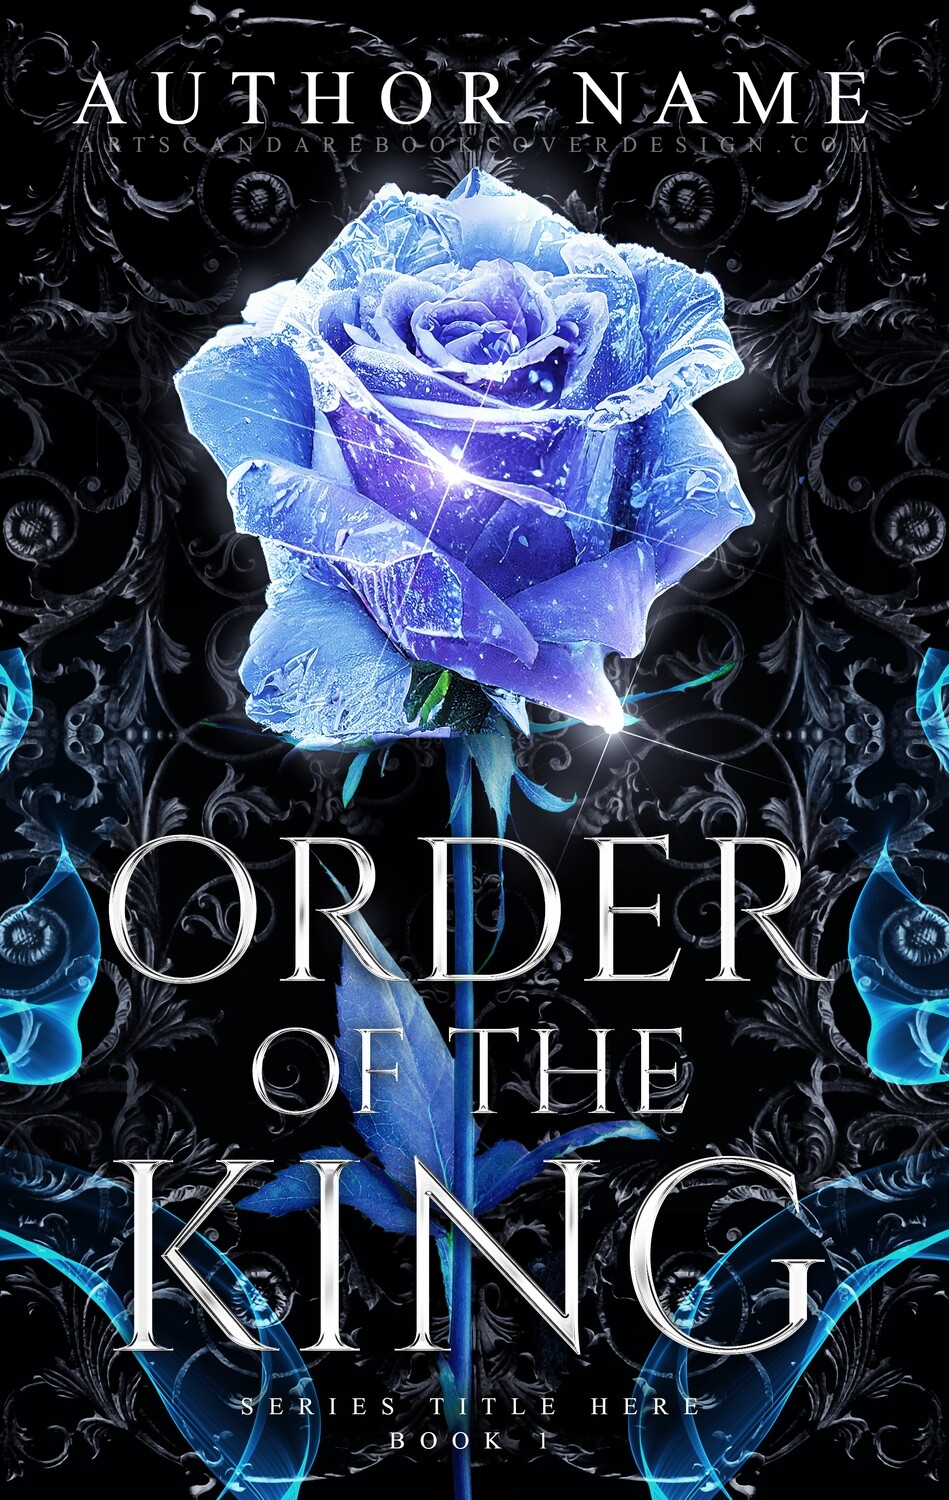 ORDER OF THE KING